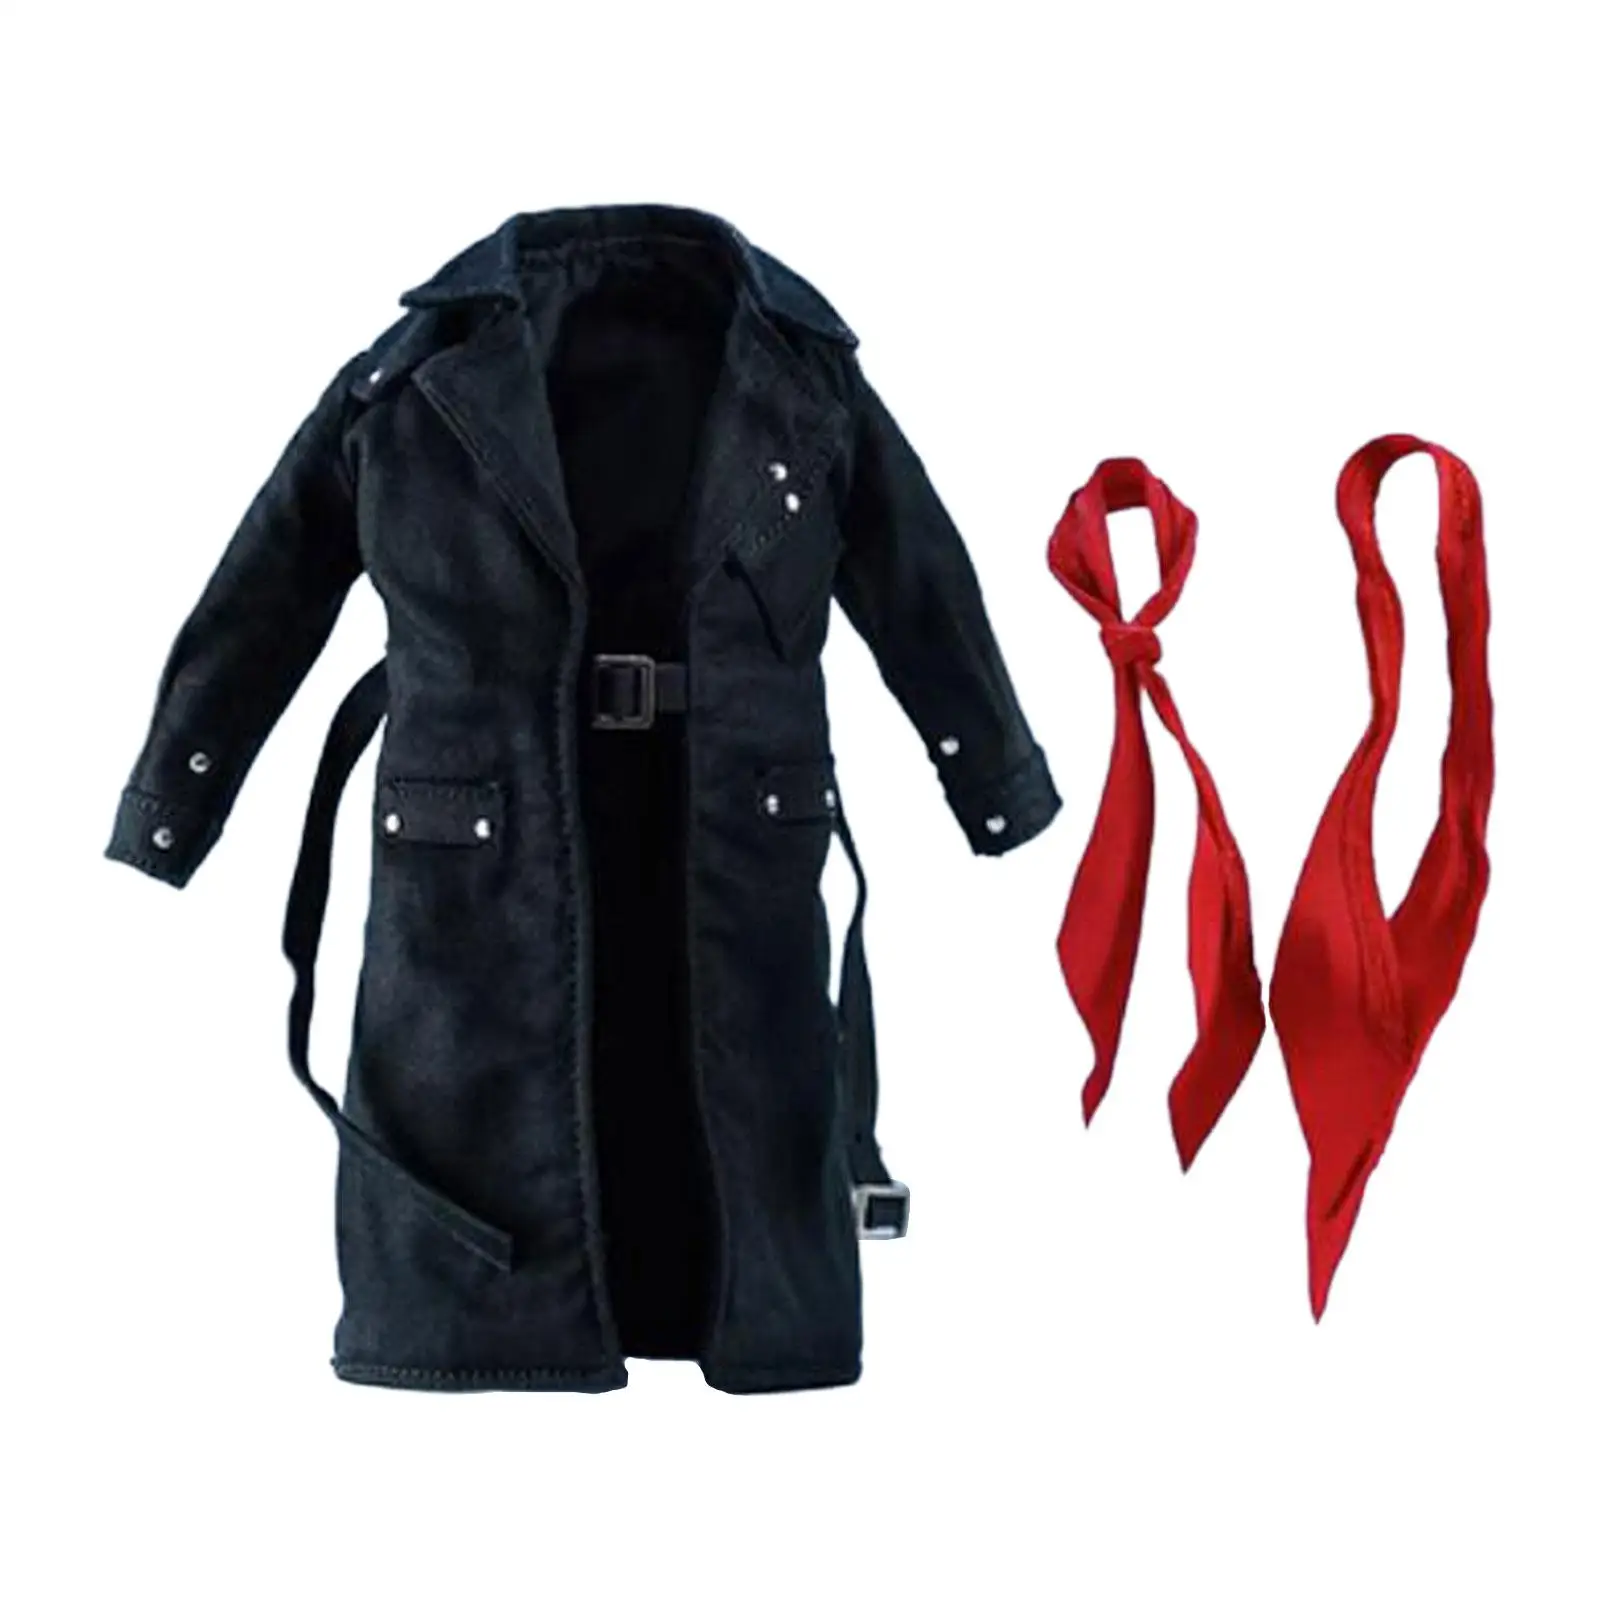 1/12 Scale Wired Trench Coat Costume Stylish Dolls Dress up Male Figure Coat for 6`` inch Soldier Figures Accessories